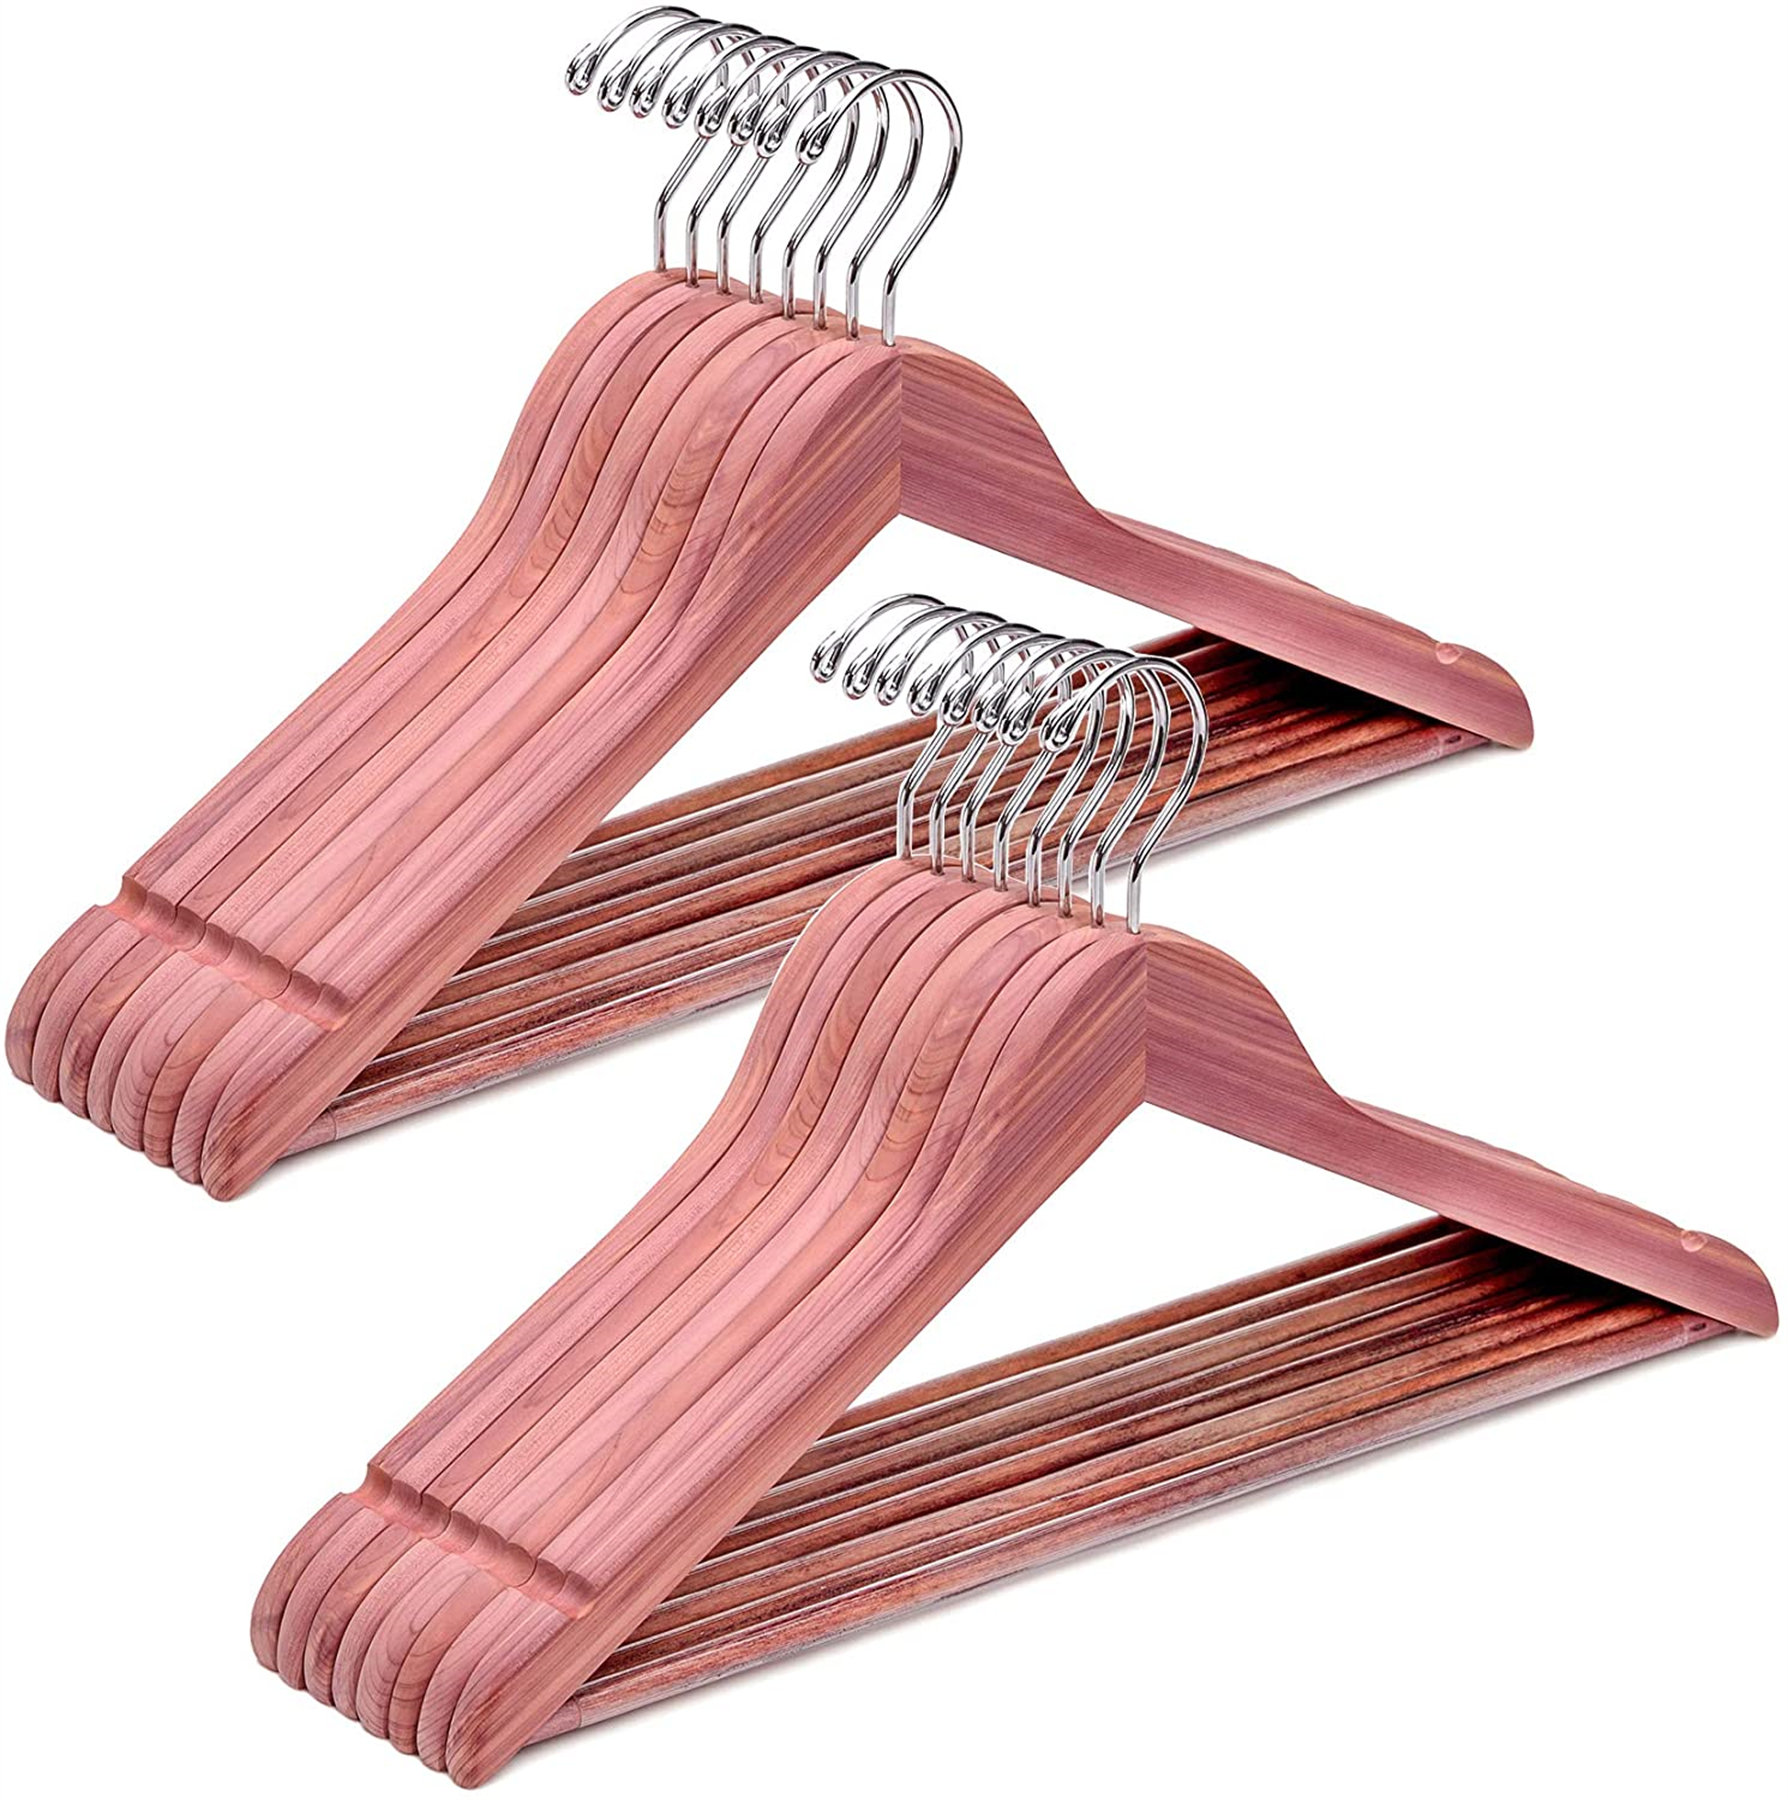 Neaties Bamboo Natural Wood Hangers with Notches and Non-Slip Bar 24pk